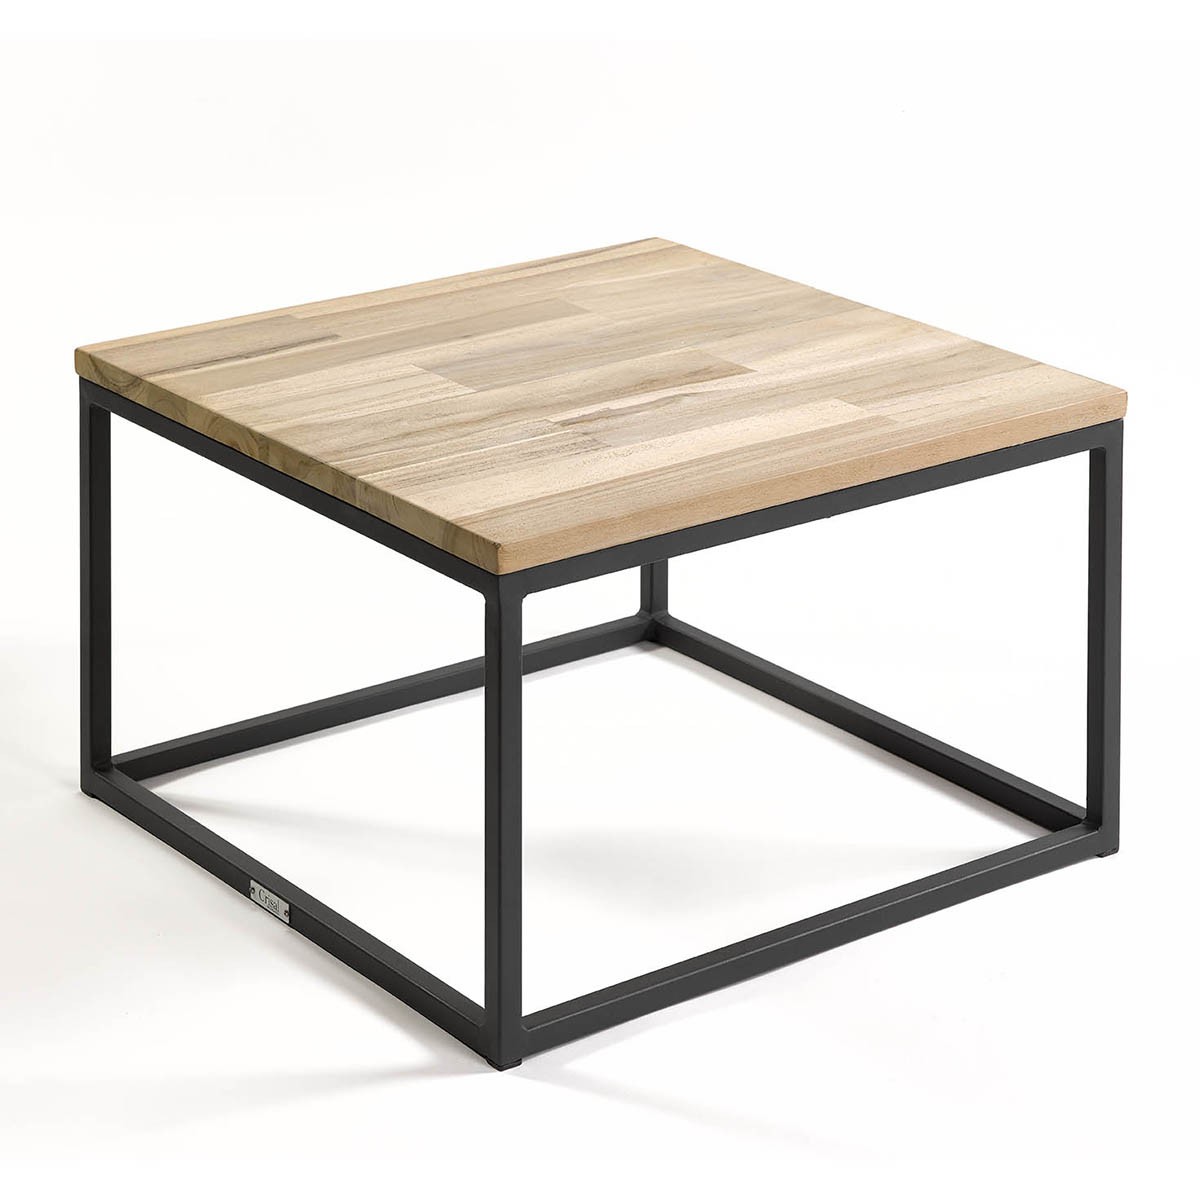 Graphite and teak outdoor coffee table